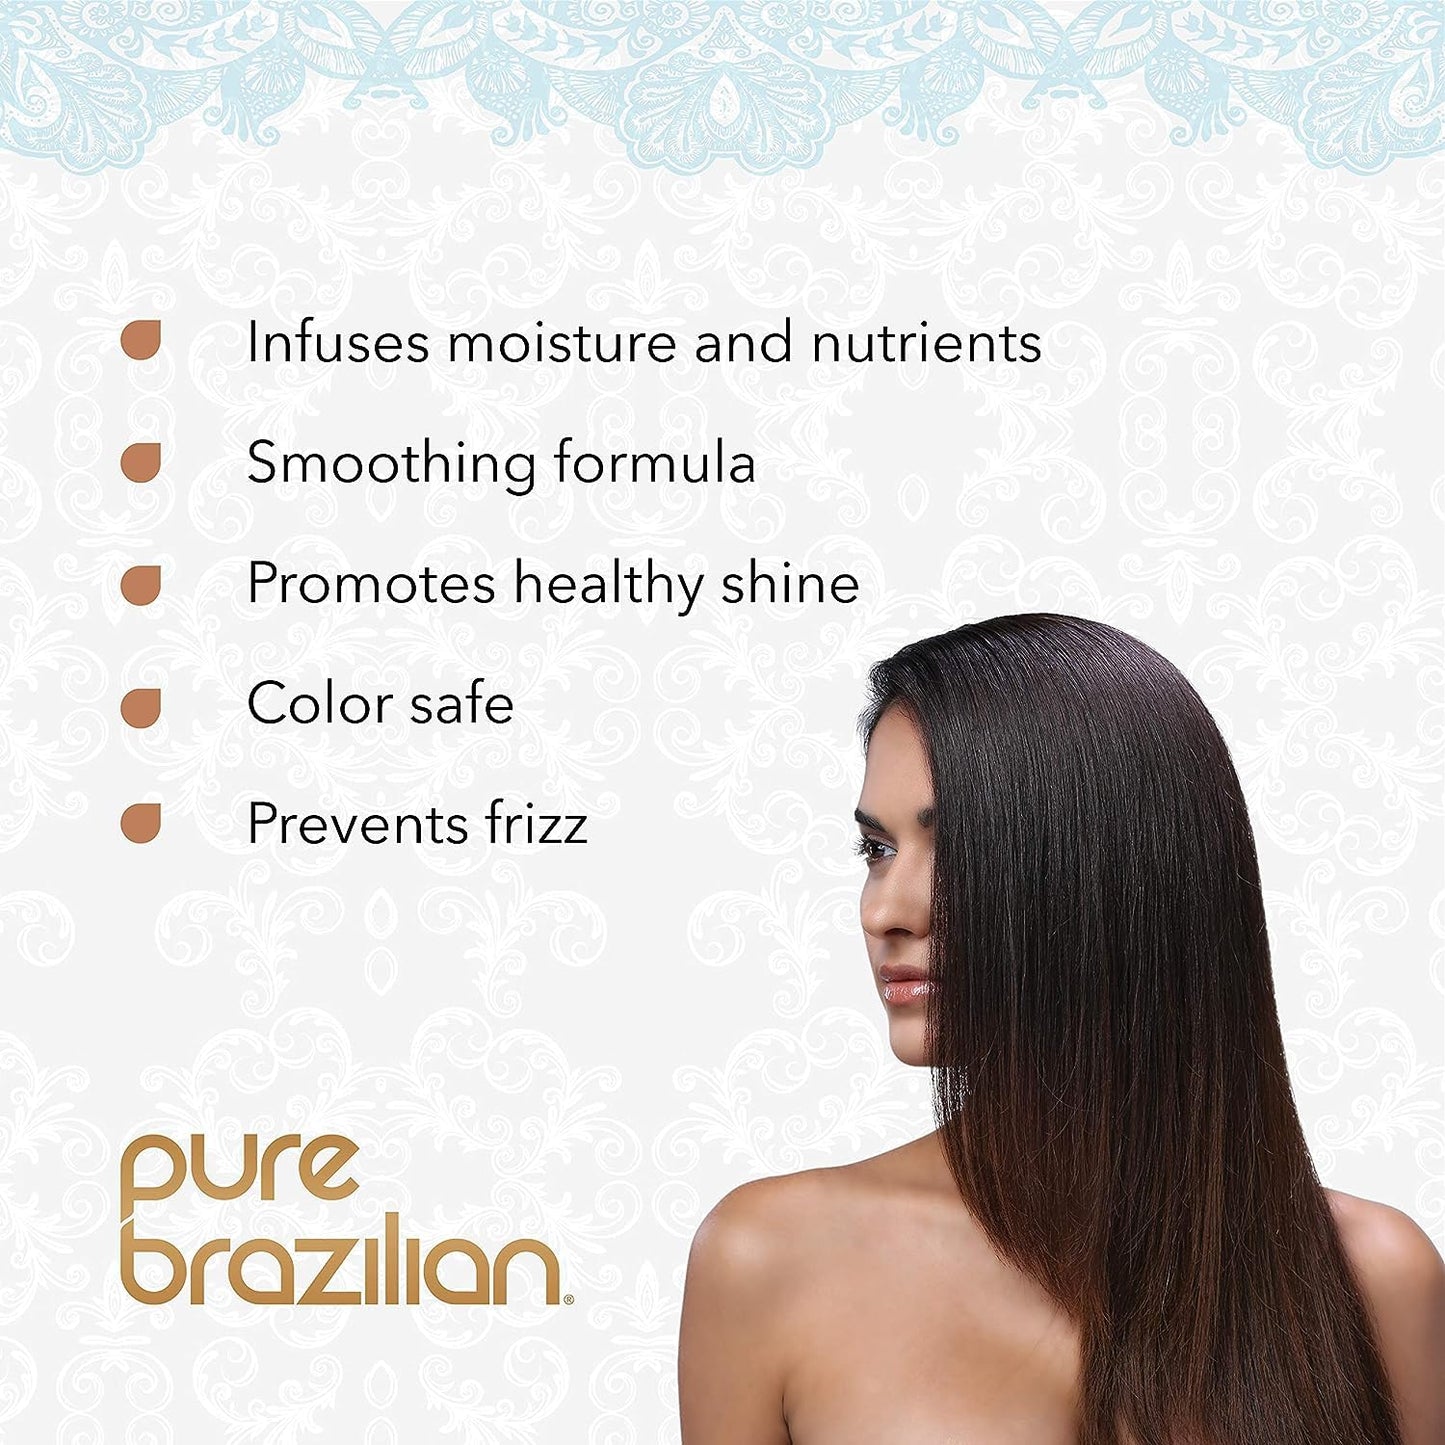 Pure Brazilian Anti-Frizz Daily Conditioner with Keratin and Acai, Smoothing and Strengthening Complex for Shinier Hair without Frizz, 3 Oz